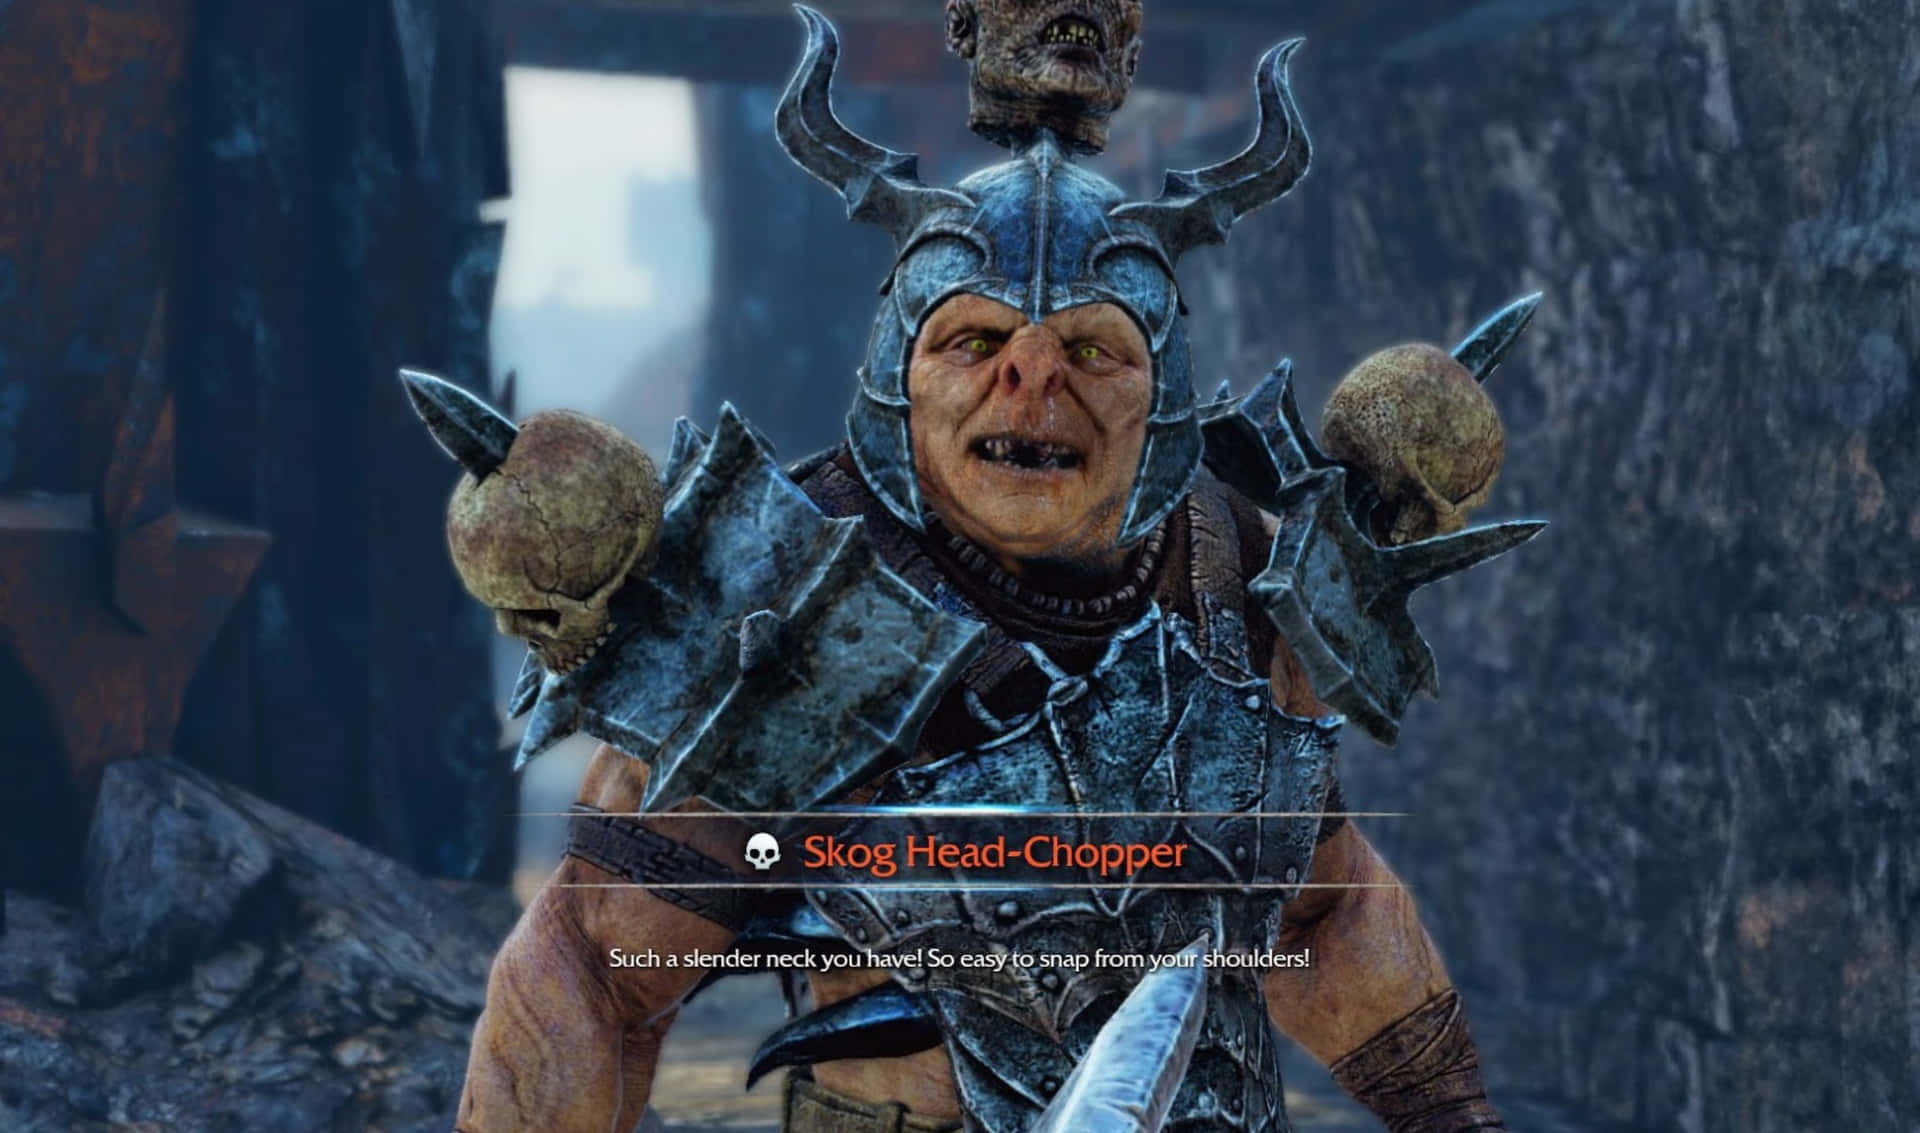 The Character In The Game Is Wearing Armor